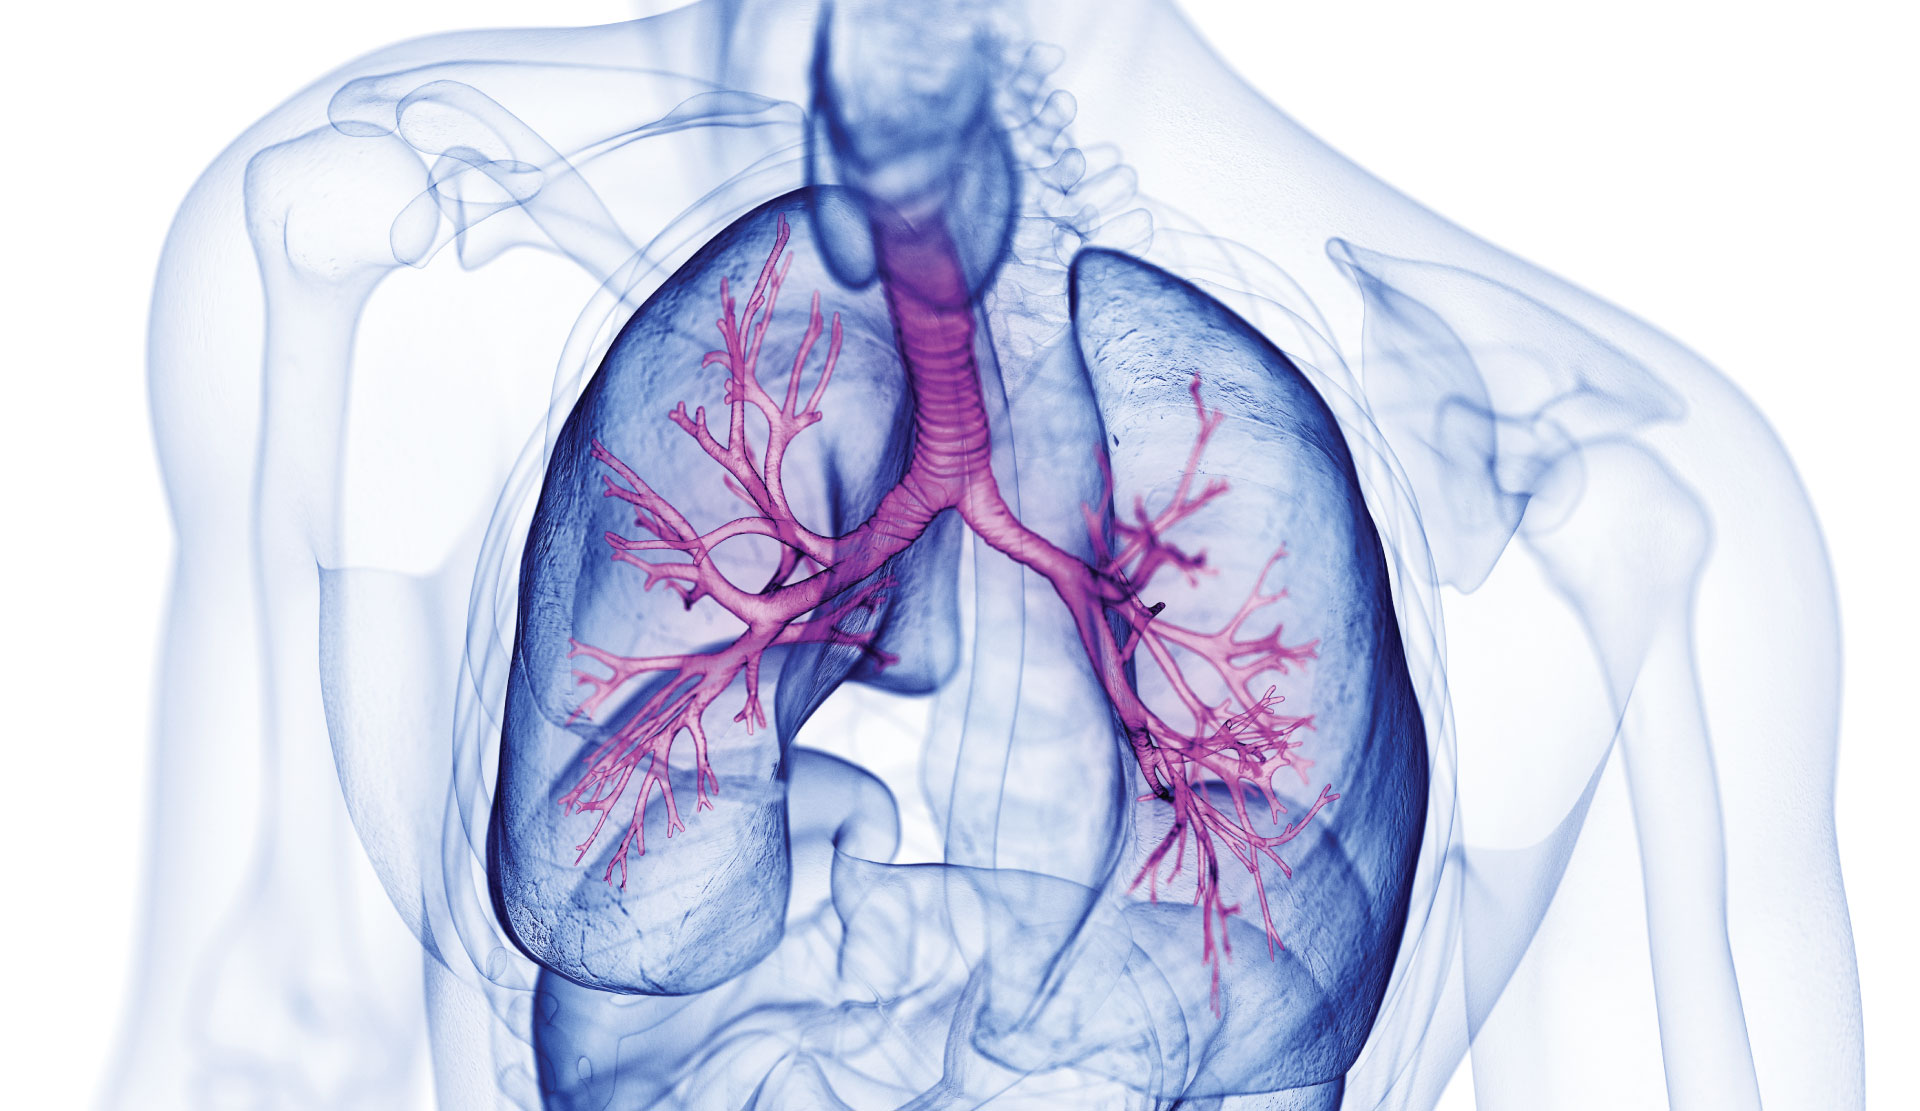 Should you have a lung CT scan? Significant cancer survival rates support screening for at-risk group